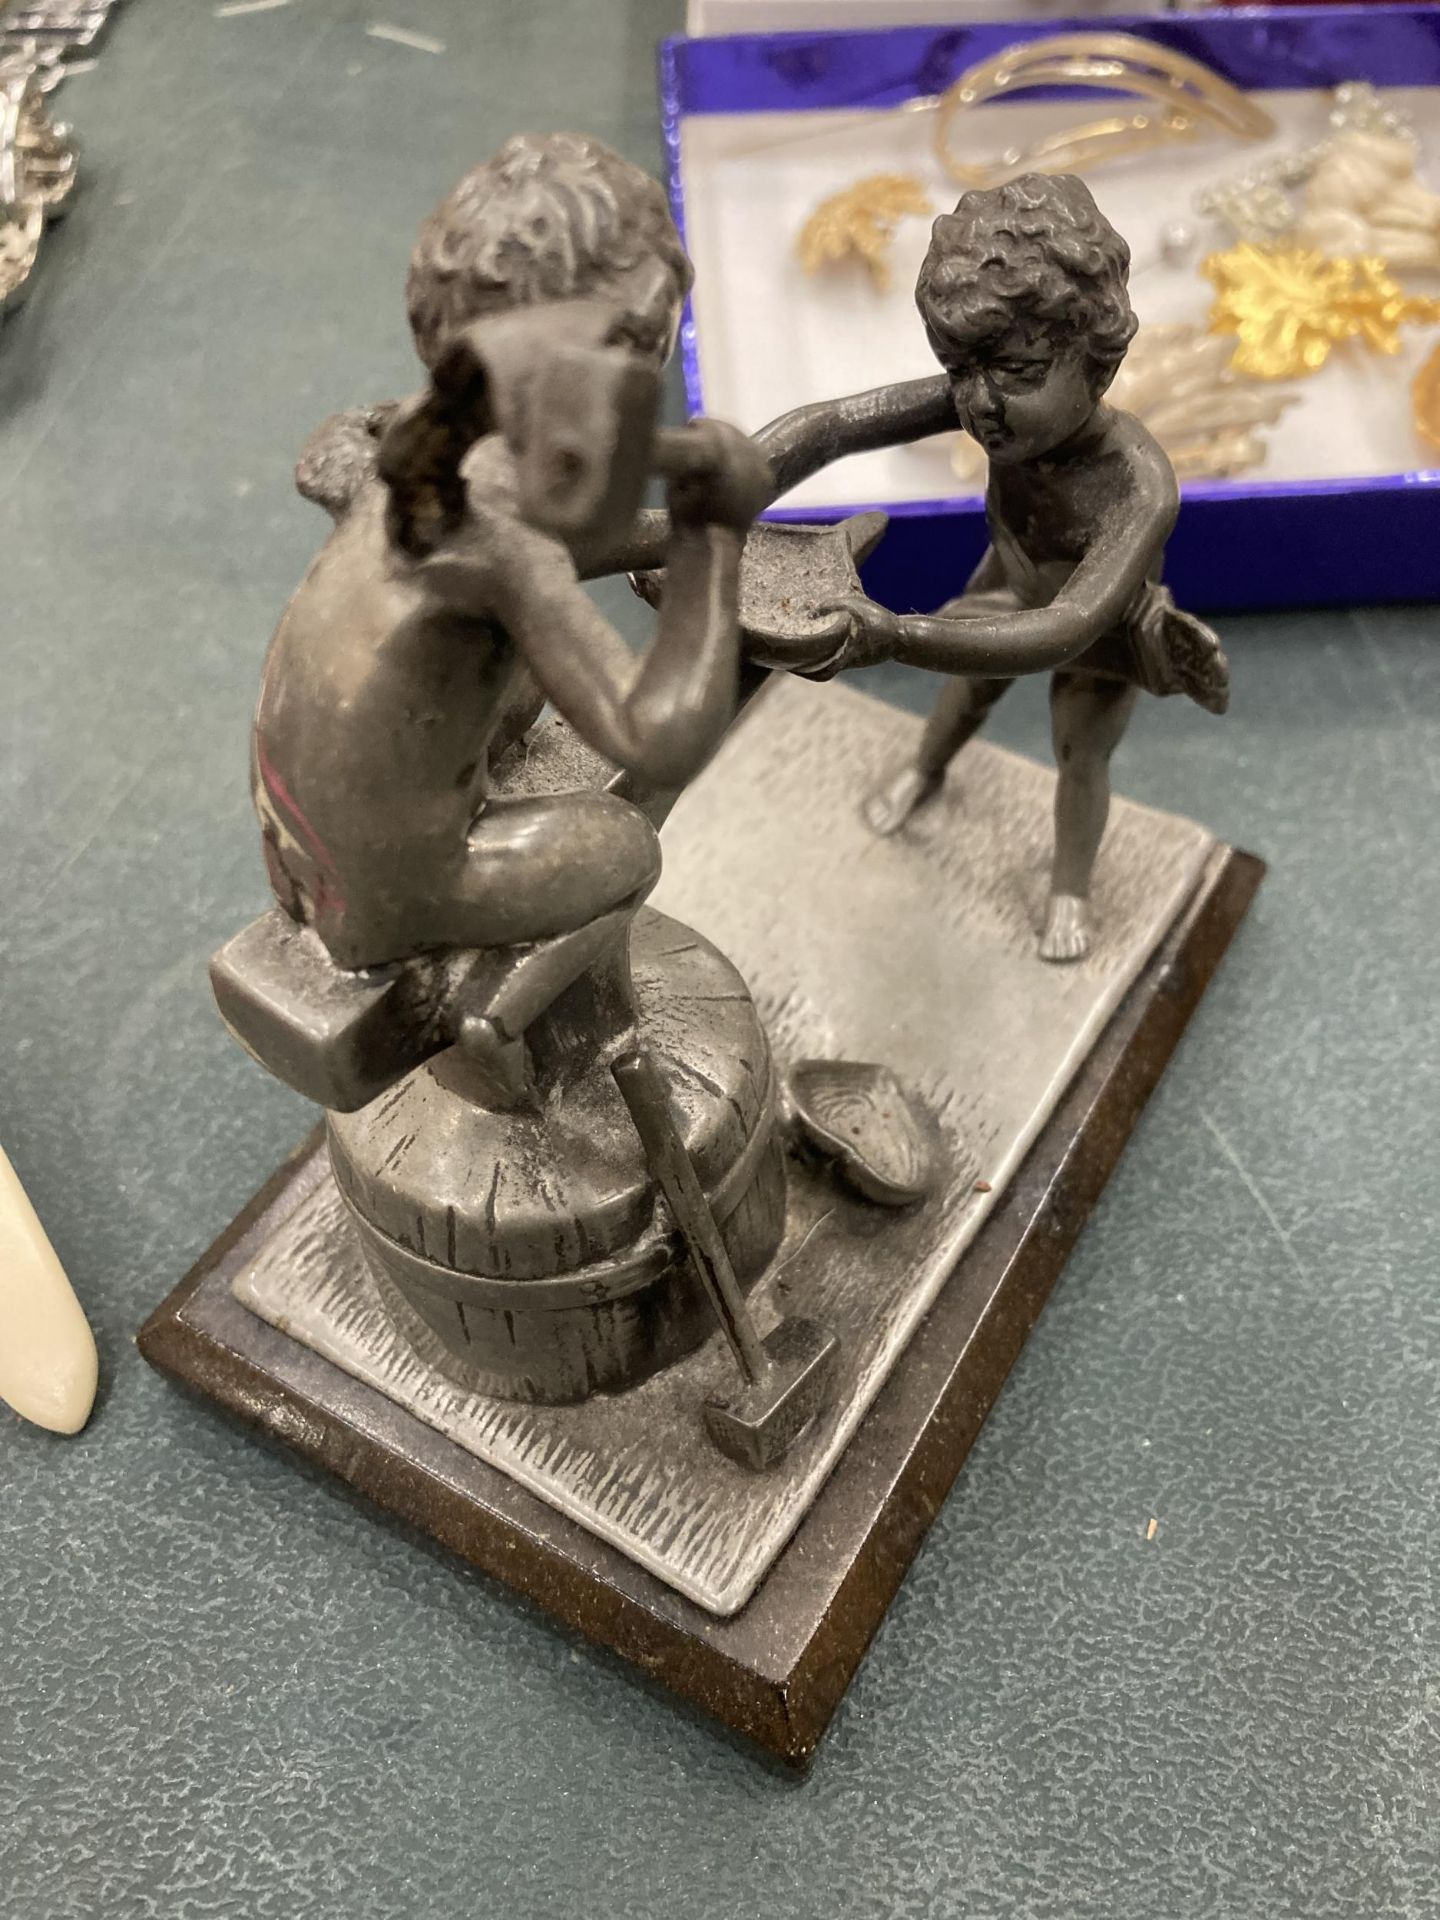 A PEWTER FIGURE OF A BLACKSMITH ON BASE - Image 2 of 3